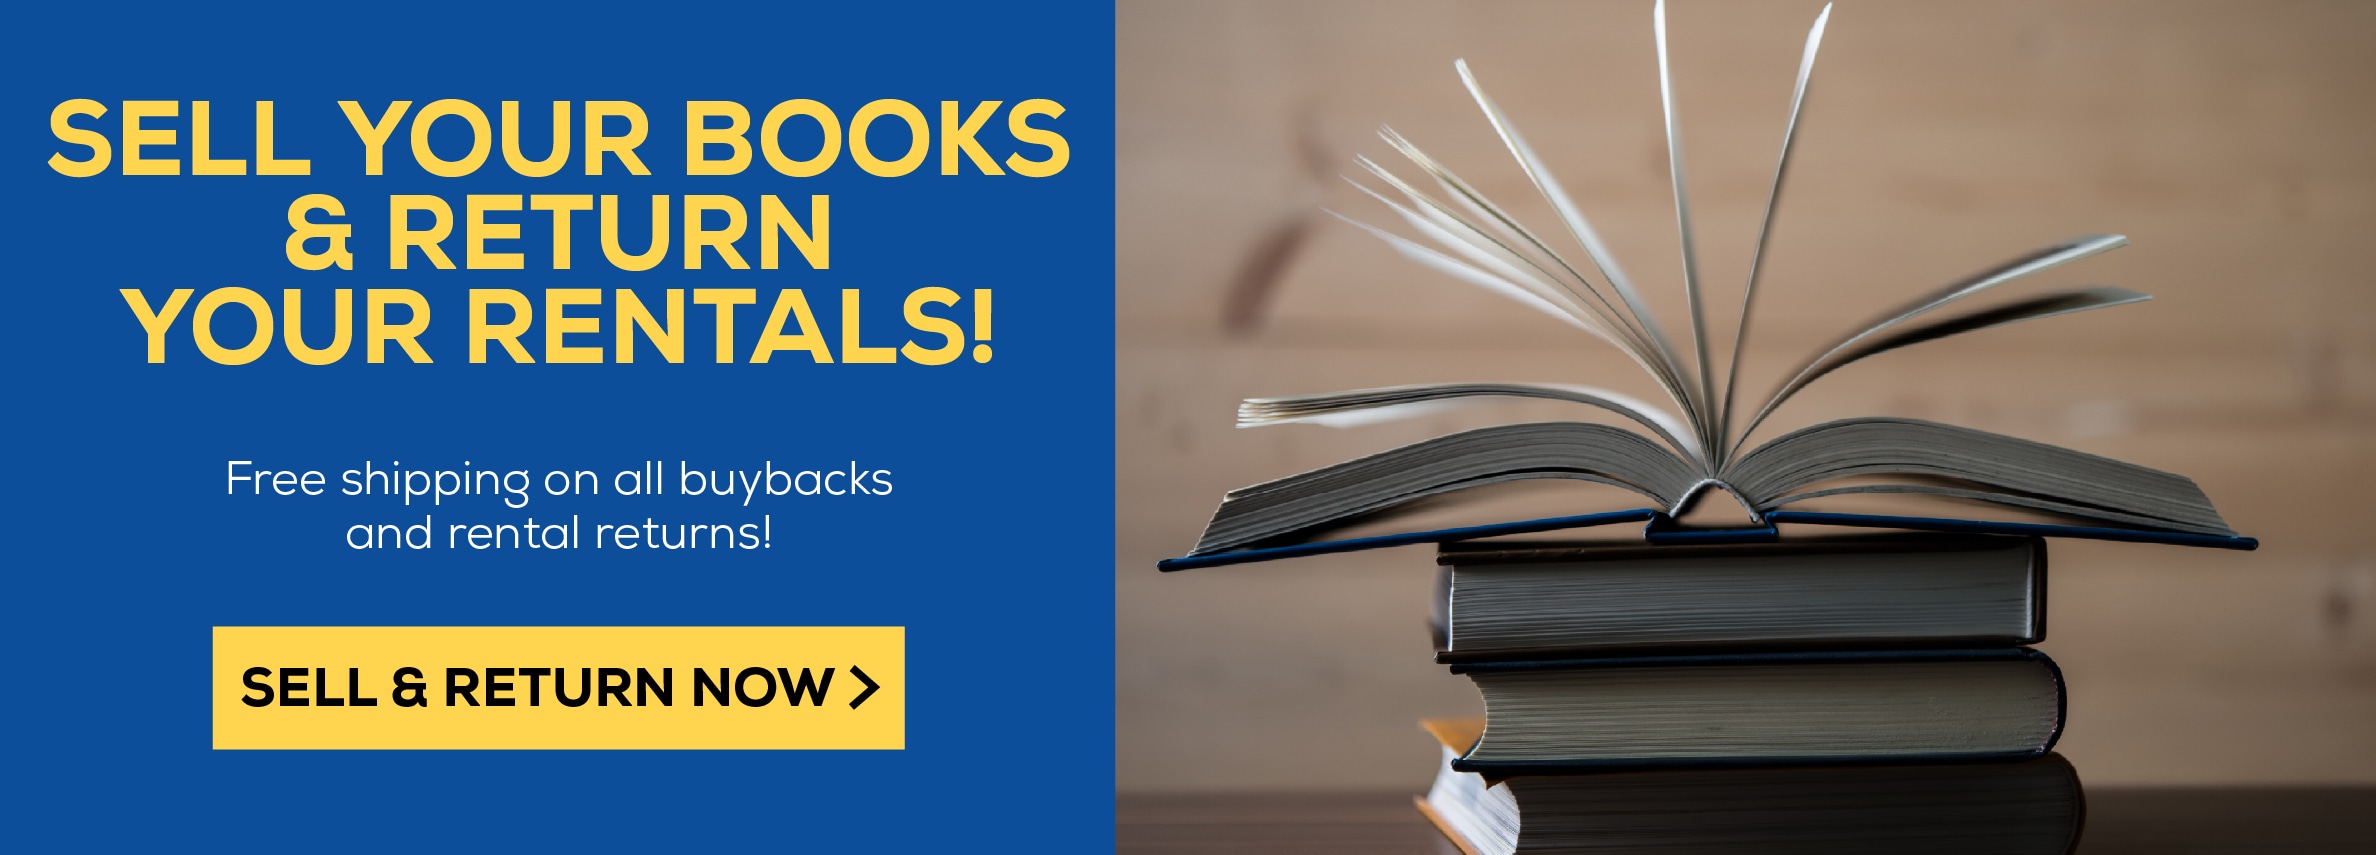 Sell your books and return your rentals! free shipping on all buybacks and rental returns! Sell and retrun now.